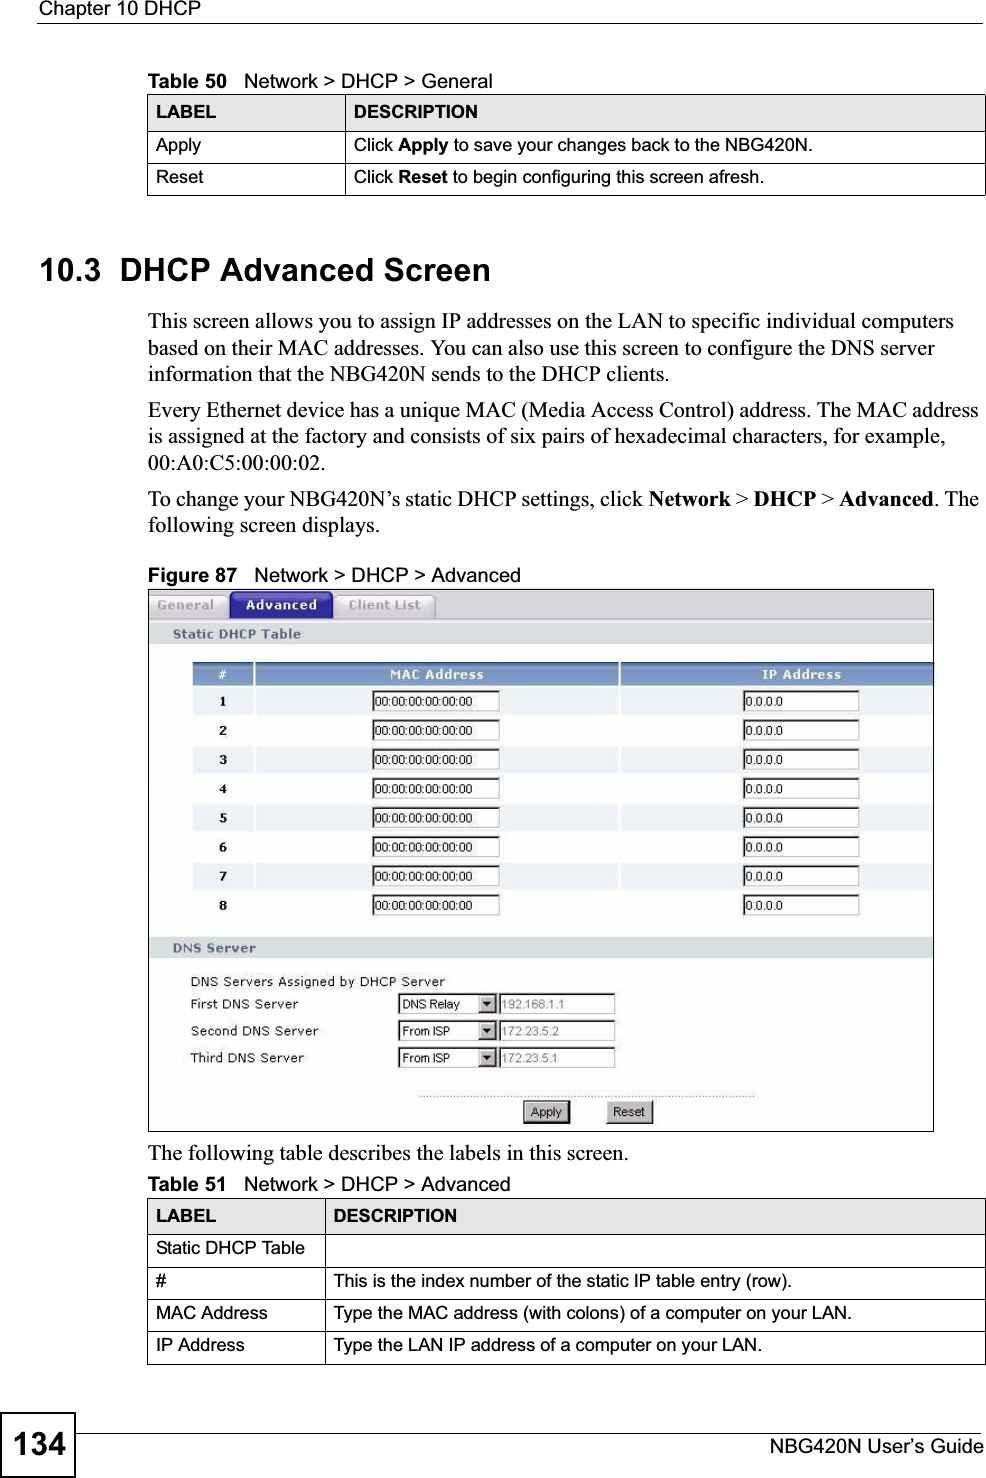 Chapter 10 DHCPNBG420N User’s Guide13410.3  DHCP Advanced ScreenThis screen allows you to assign IP addresses on the LAN to specific individual computers based on their MAC addresses. You can also use this screen to configure the DNS server information that the NBG420N sends to the DHCP clients.Every Ethernet device has a unique MAC (Media Access Control) address. The MAC address is assigned at the factory and consists of six pairs of hexadecimal characters, for example, 00:A0:C5:00:00:02.To change your NBG420N’s static DHCP settings, click Network &gt; DHCP &gt; Advanced. The following screen displays.Figure 87   Network &gt; DHCP &gt; Advanced The following table describes the labels in this screen.Apply Click Apply to save your changes back to the NBG420N.Reset Click Reset to begin configuring this screen afresh.Table 50   Network &gt; DHCP &gt; General LABEL DESCRIPTIONTable 51   Network &gt; DHCP &gt; AdvancedLABEL DESCRIPTIONStatic DHCP Table# This is the index number of the static IP table entry (row).MAC Address Type the MAC address (with colons) of a computer on your LAN.IP Address Type the LAN IP address of a computer on your LAN.